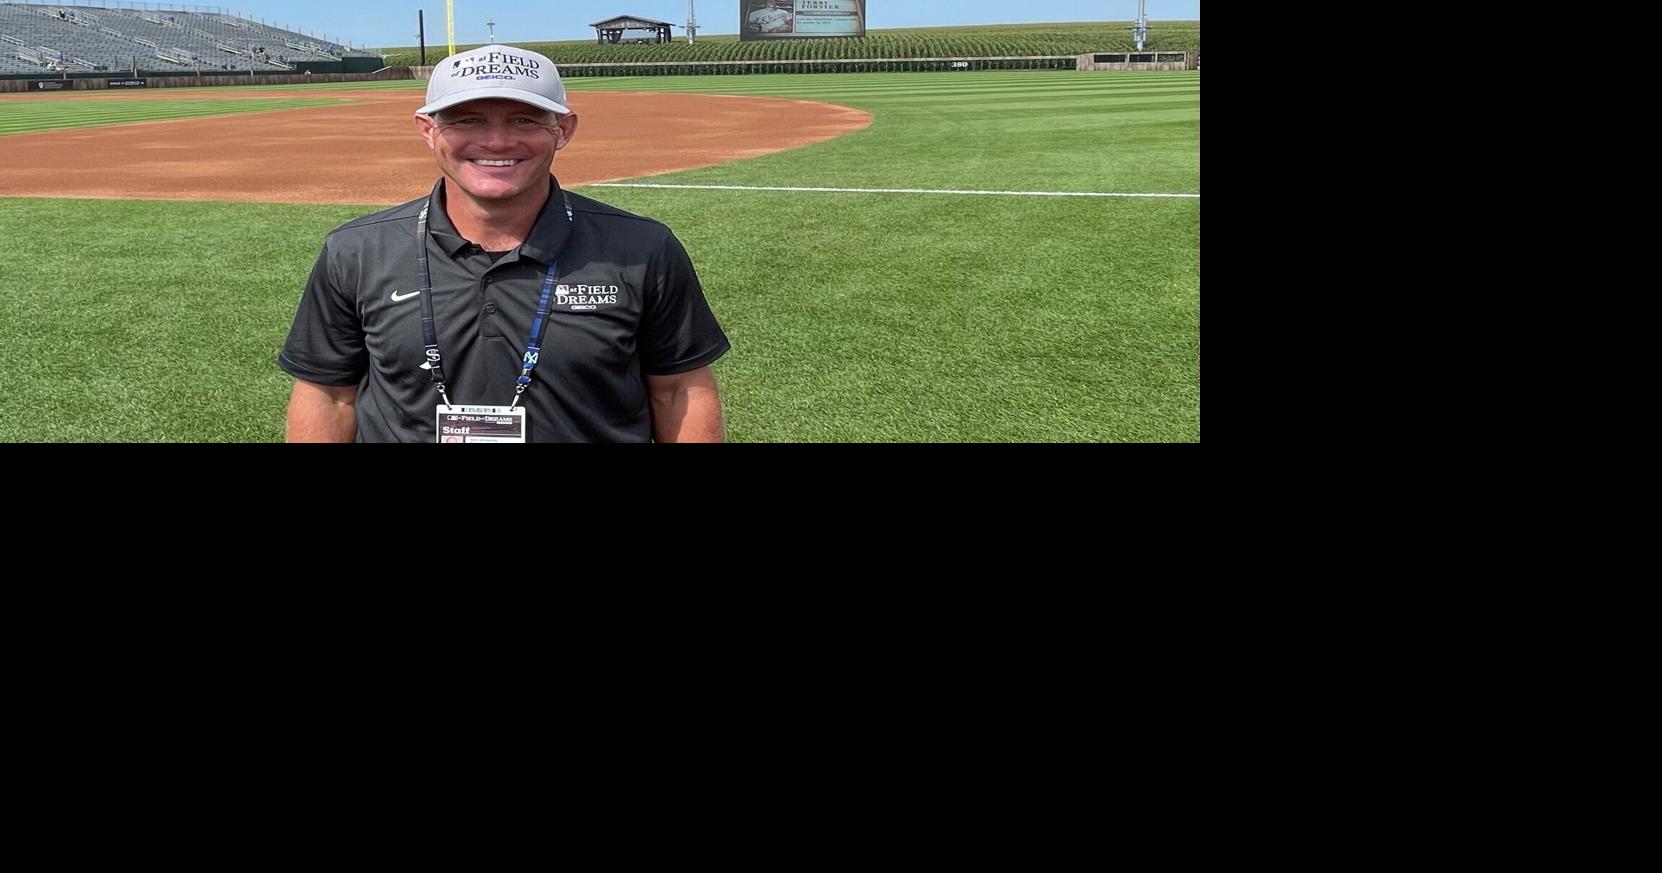 Texas A&M Baseball - If you build it, he will come Field manager Nick  McKenna was bestowed the honor of serving on the grounds crew for  Thursday's #MLBatFieldofDreams game! 👏🧢🆙 🔗  #